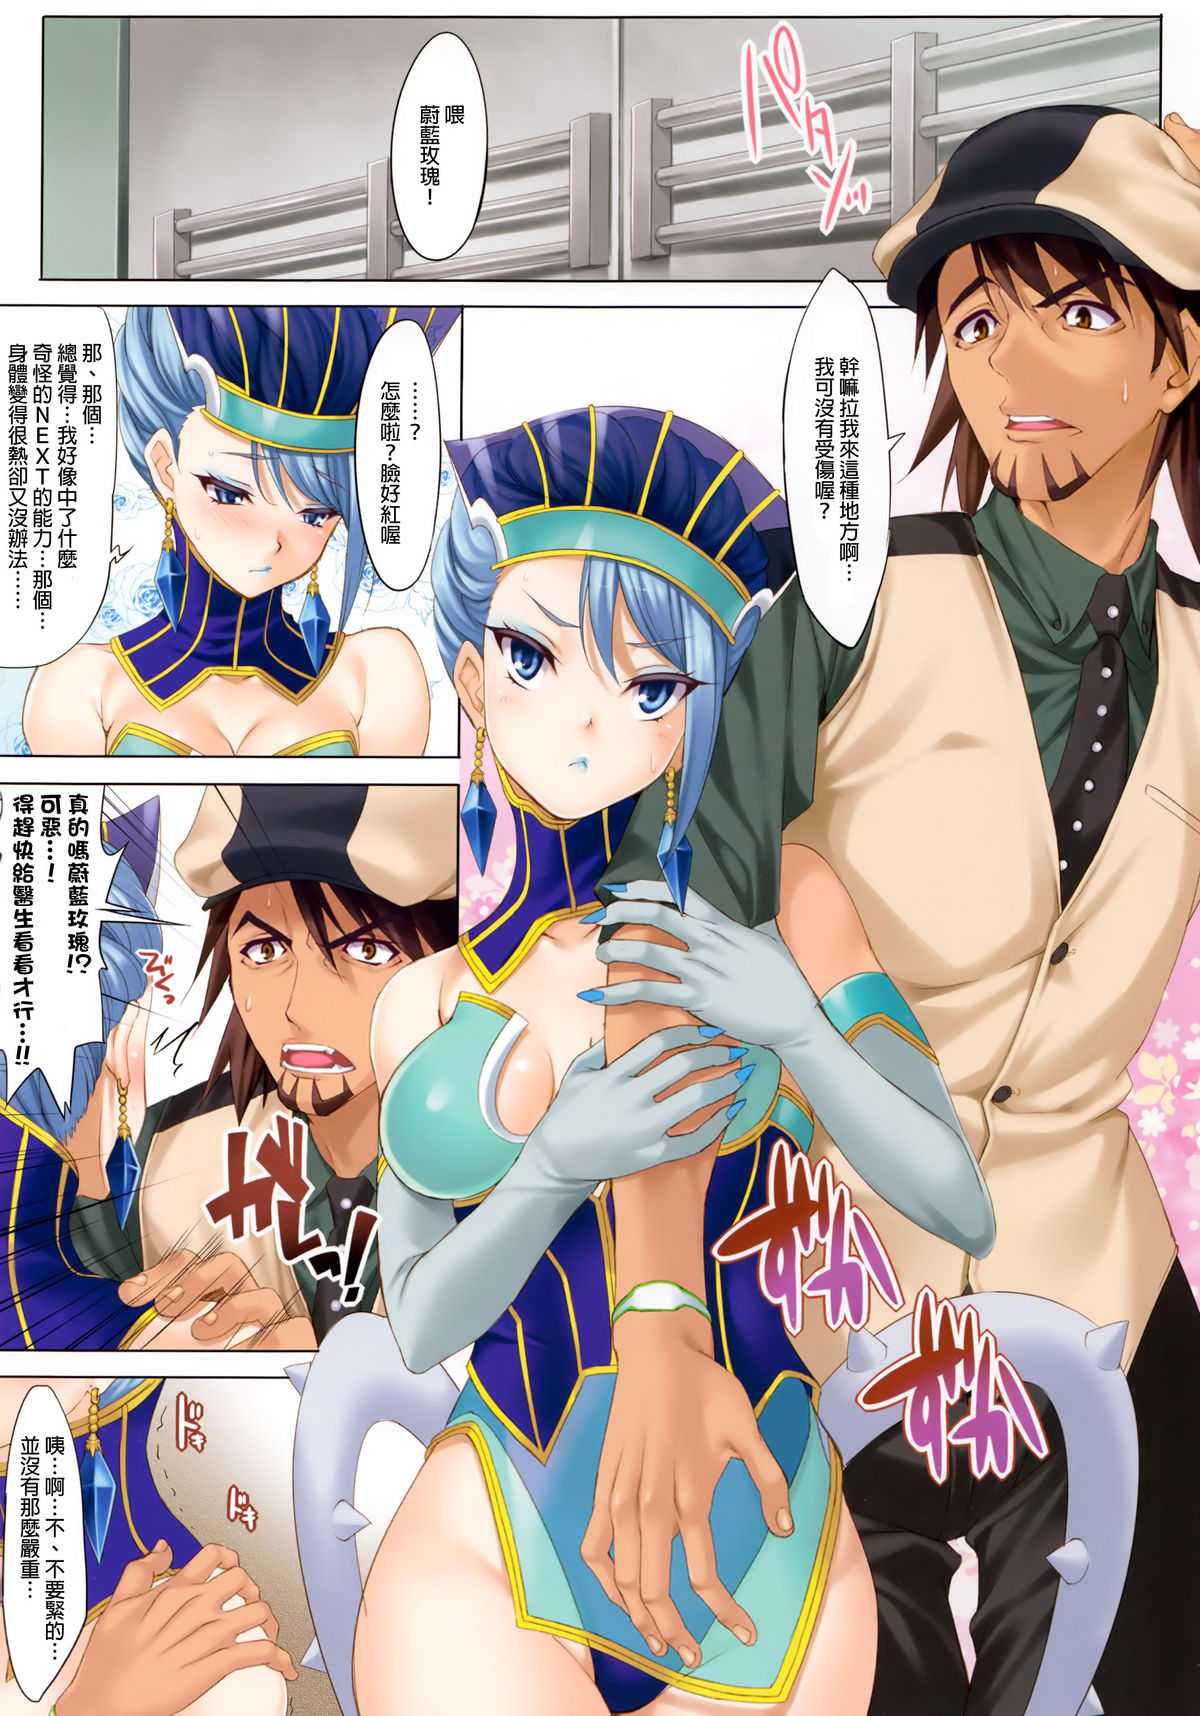 [clesta (Cle Masahiro)] CL-orz 18 (TIGER &amp; BUNNY)[Chinese][Decensored] (同人誌) [クレスタ (呉マサヒロ)] CL-orz 18 (TIGER &amp; BUNNY)[final個人漢化][無修正]